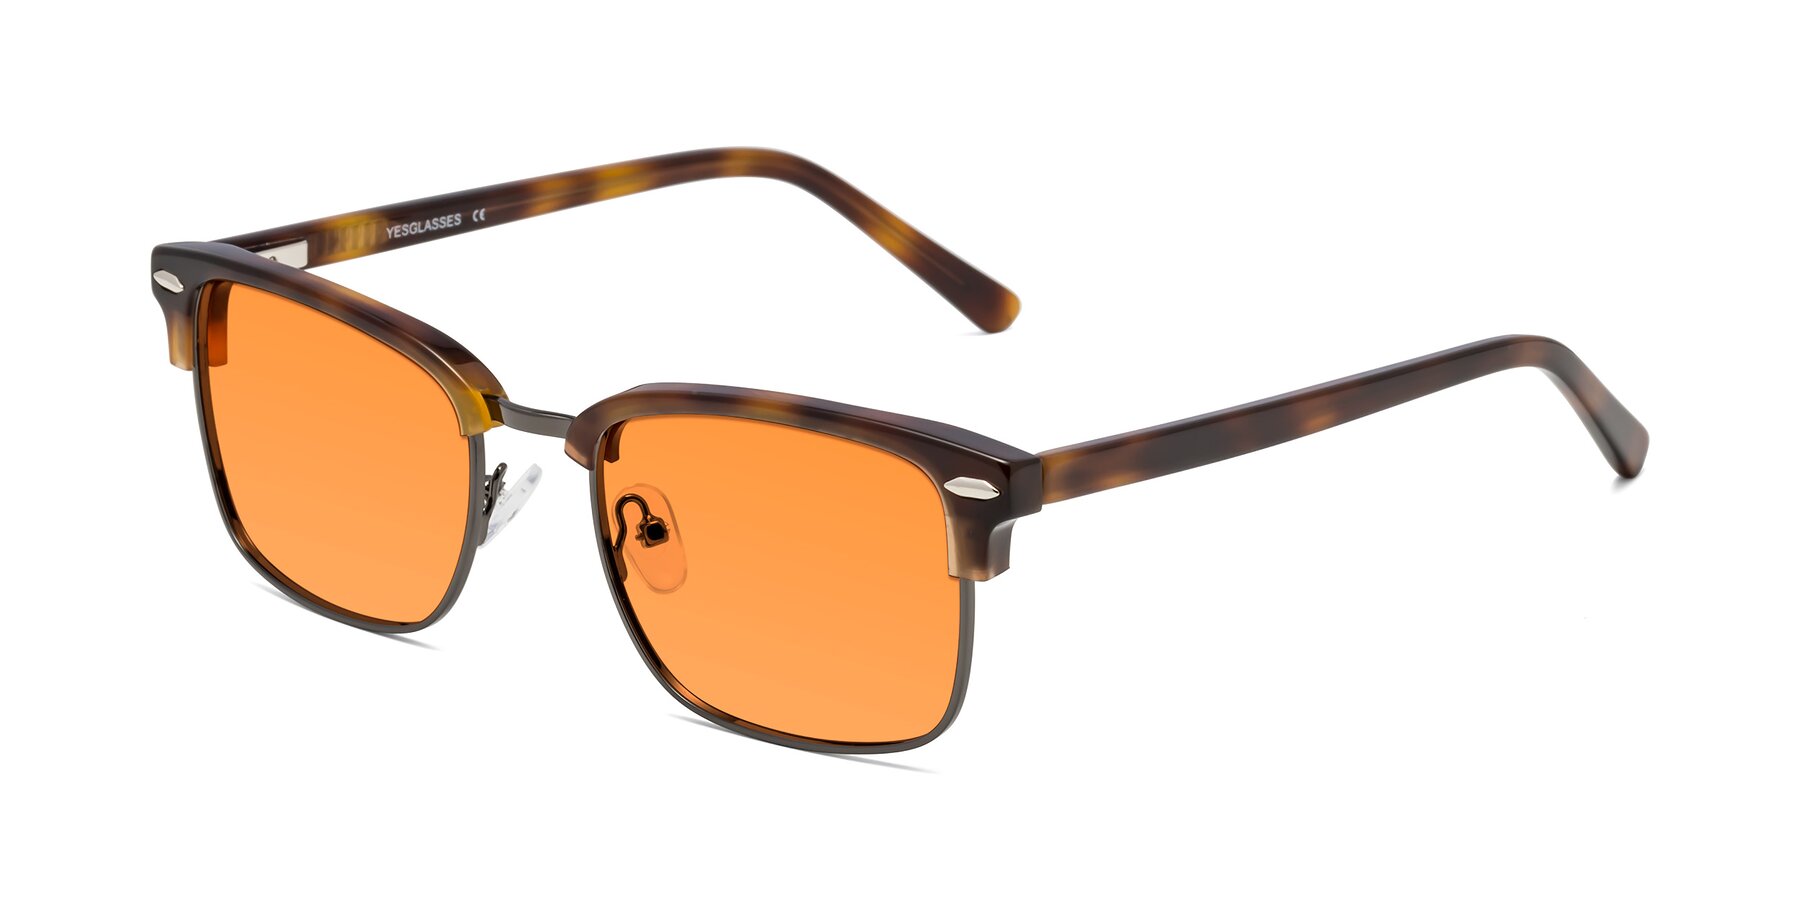 Angle of 17464 in Tortoise/ Gunmetal with Orange Tinted Lenses